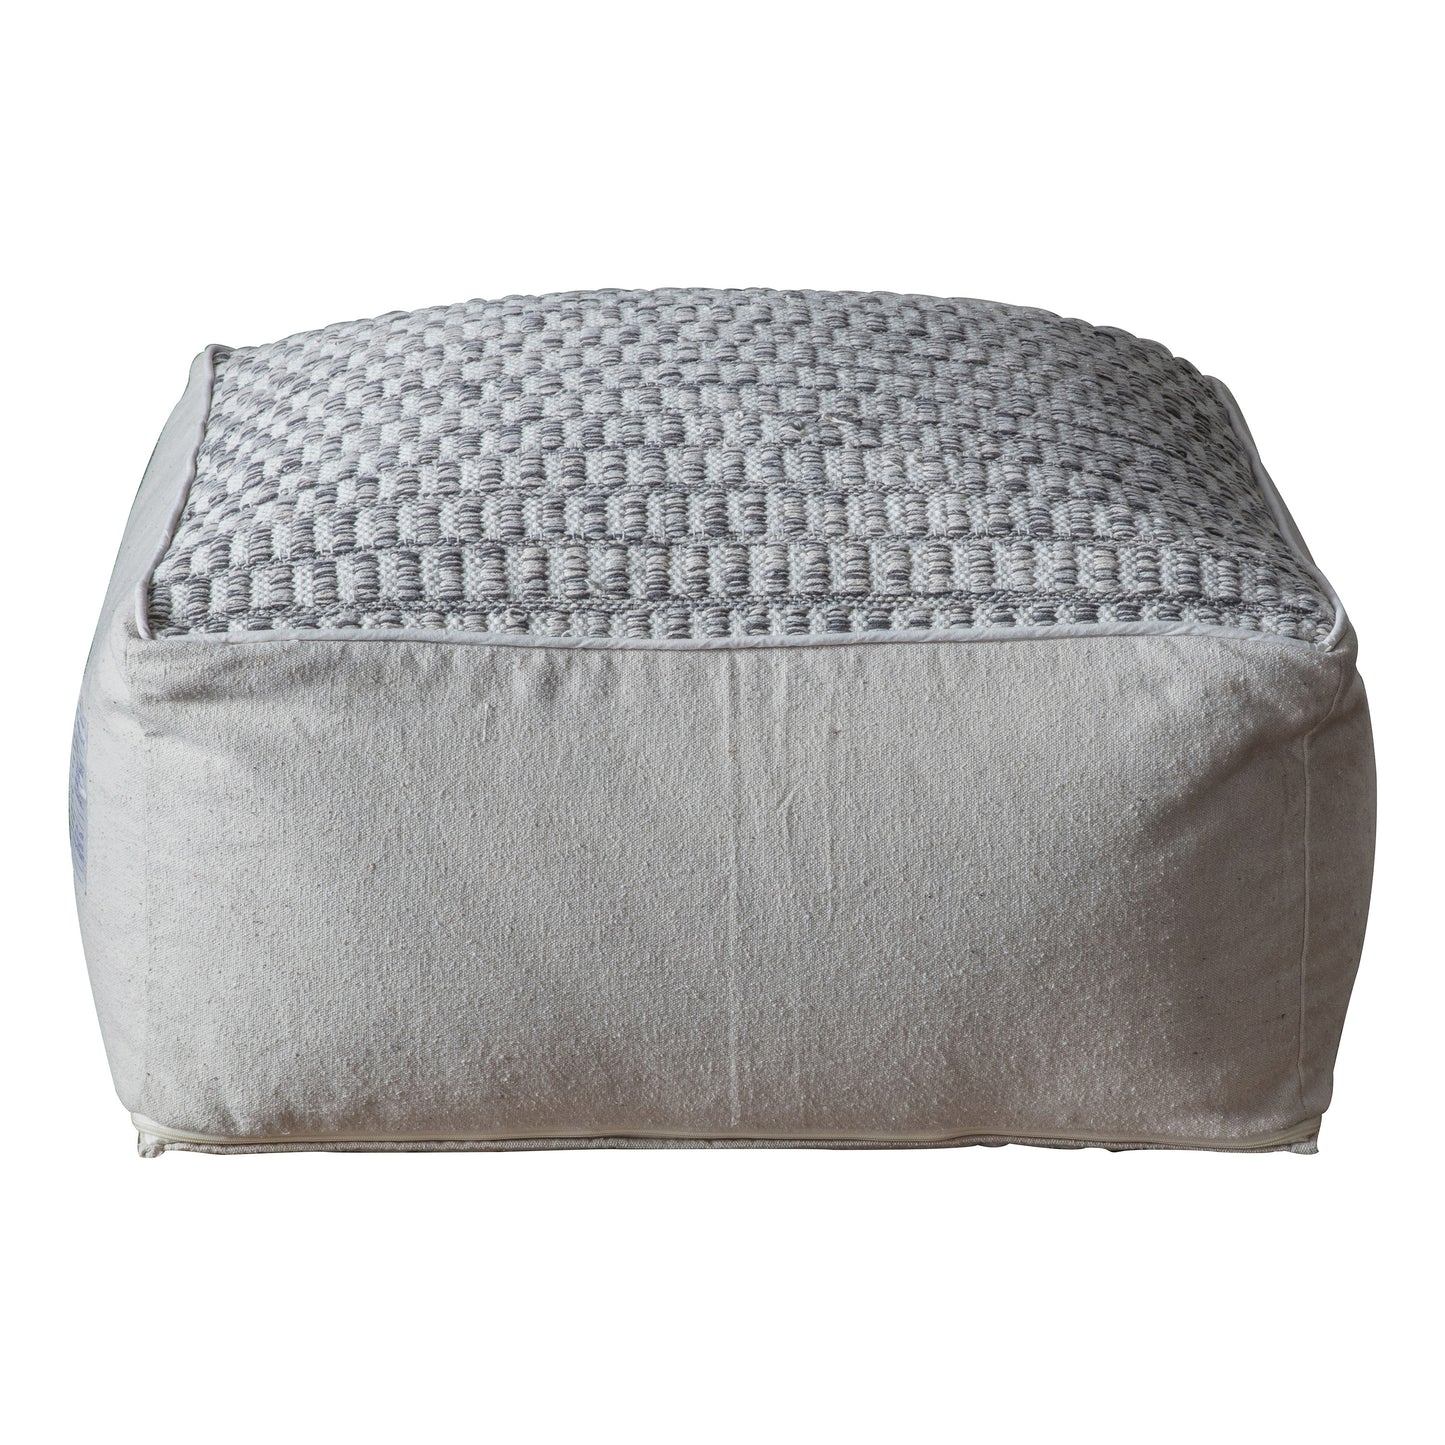 A Bruno Pouffe Grey with a woven pattern by Kikiathome.co.uk, ideal for home furniture and interior decor.